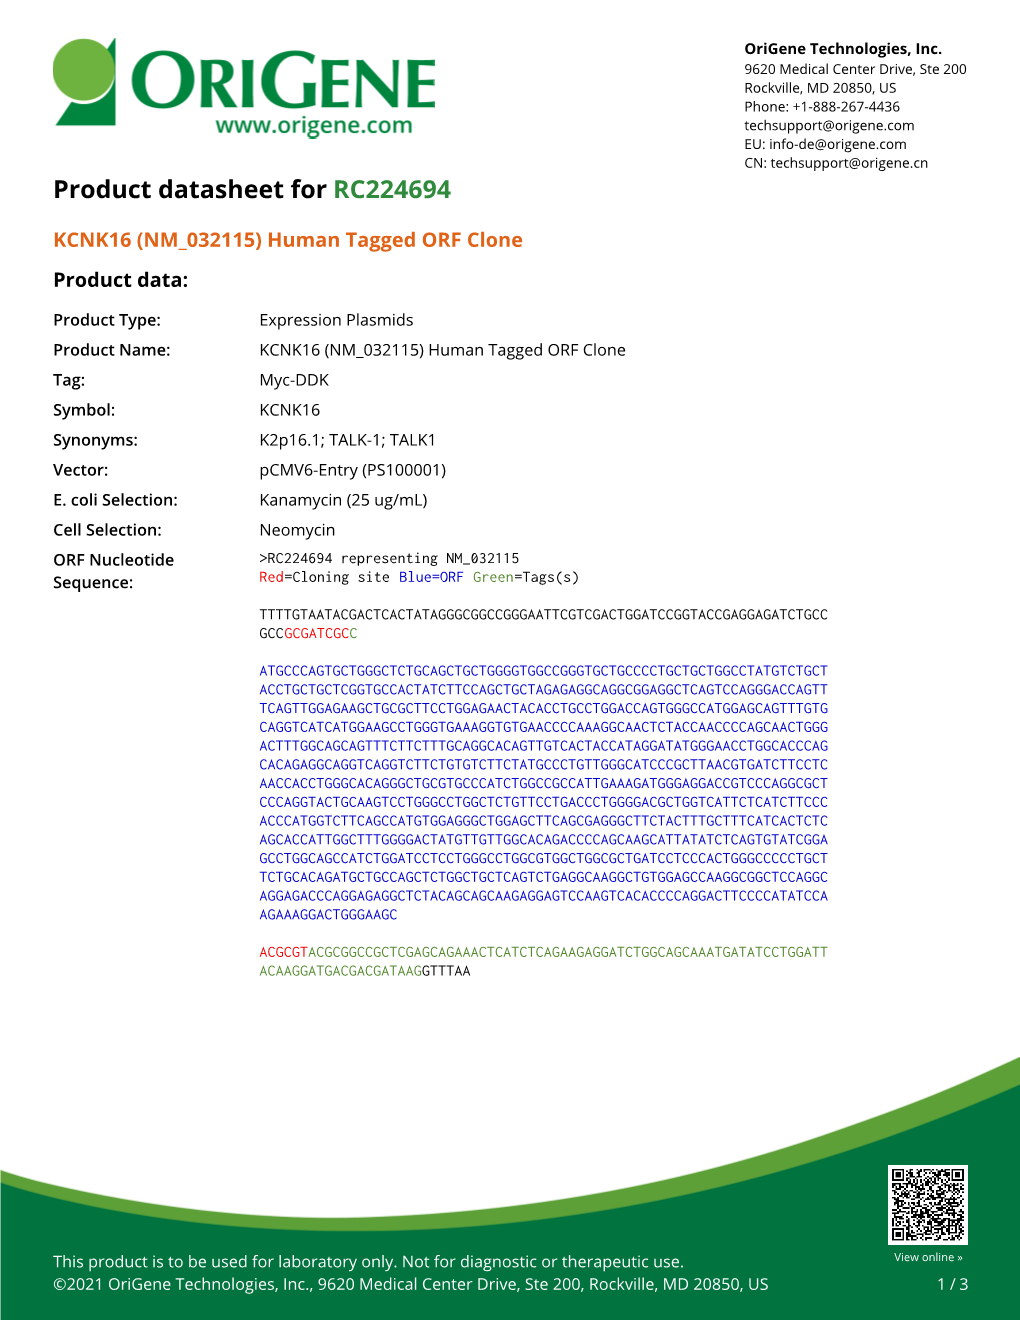 KCNK16 (NM 032115) Human Tagged ORF Clone – RC224694